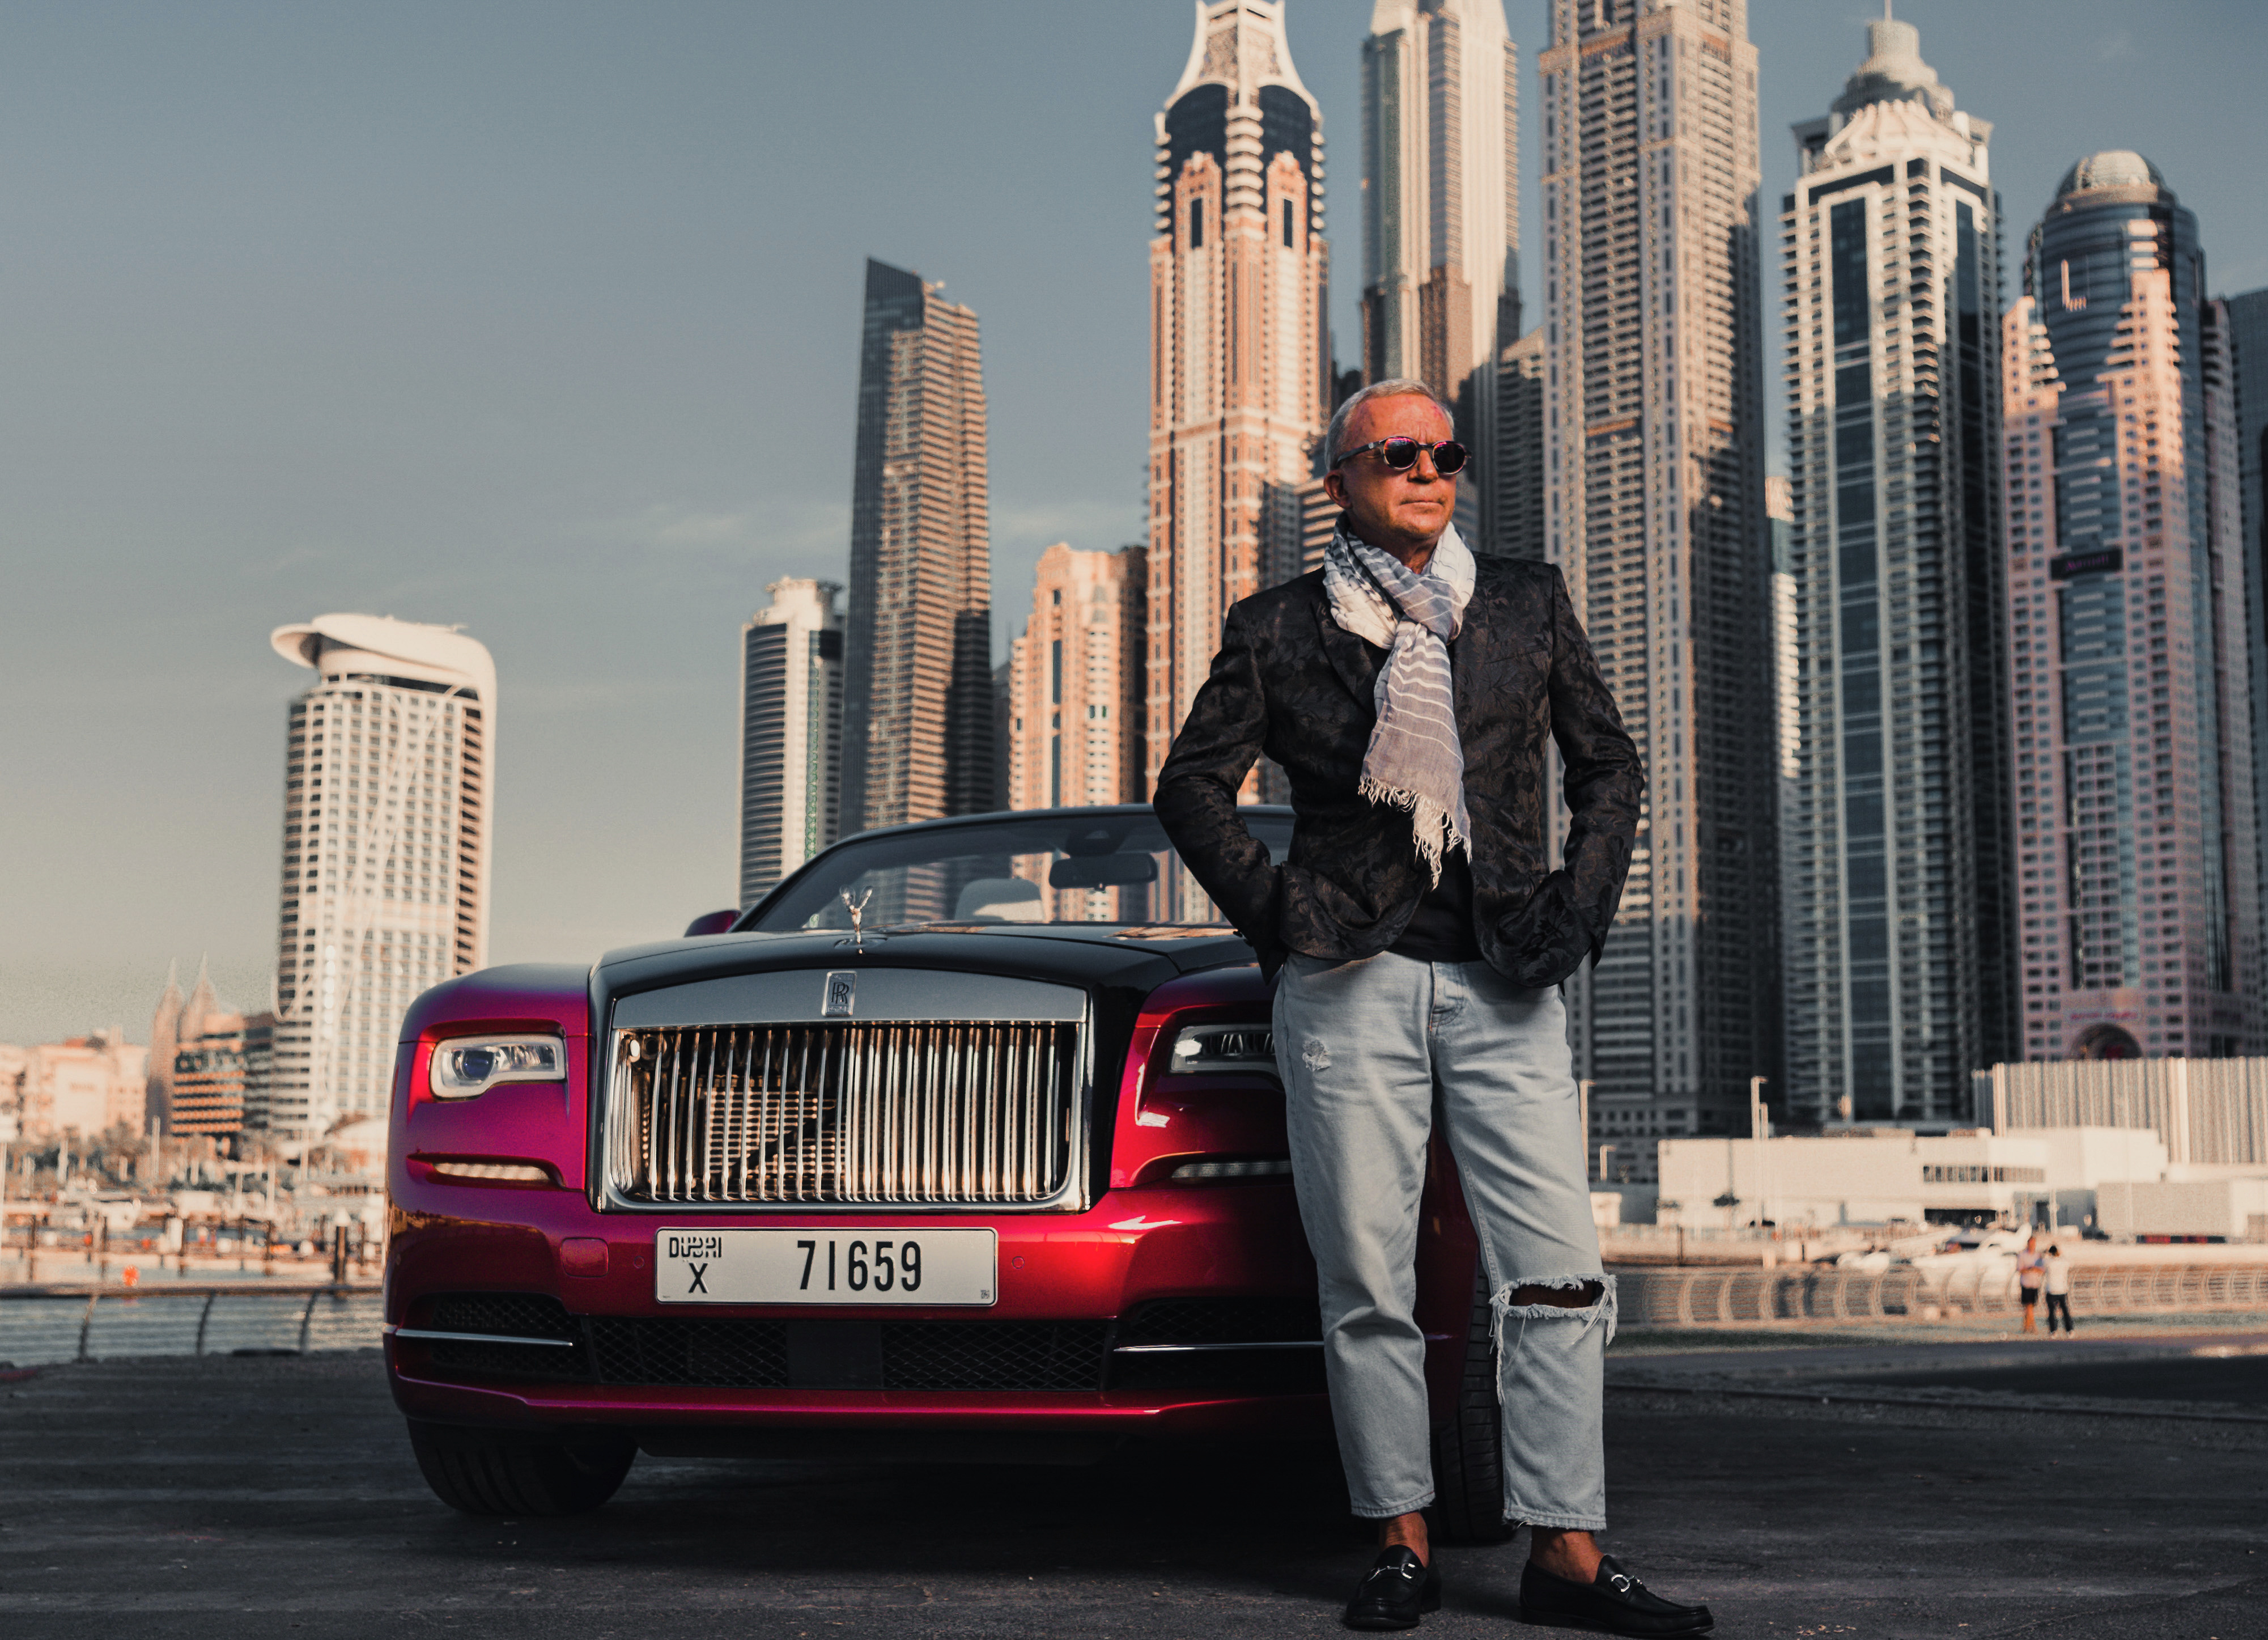 Book Your Incredible Photoshoot With Luxury Cars In Dubai!